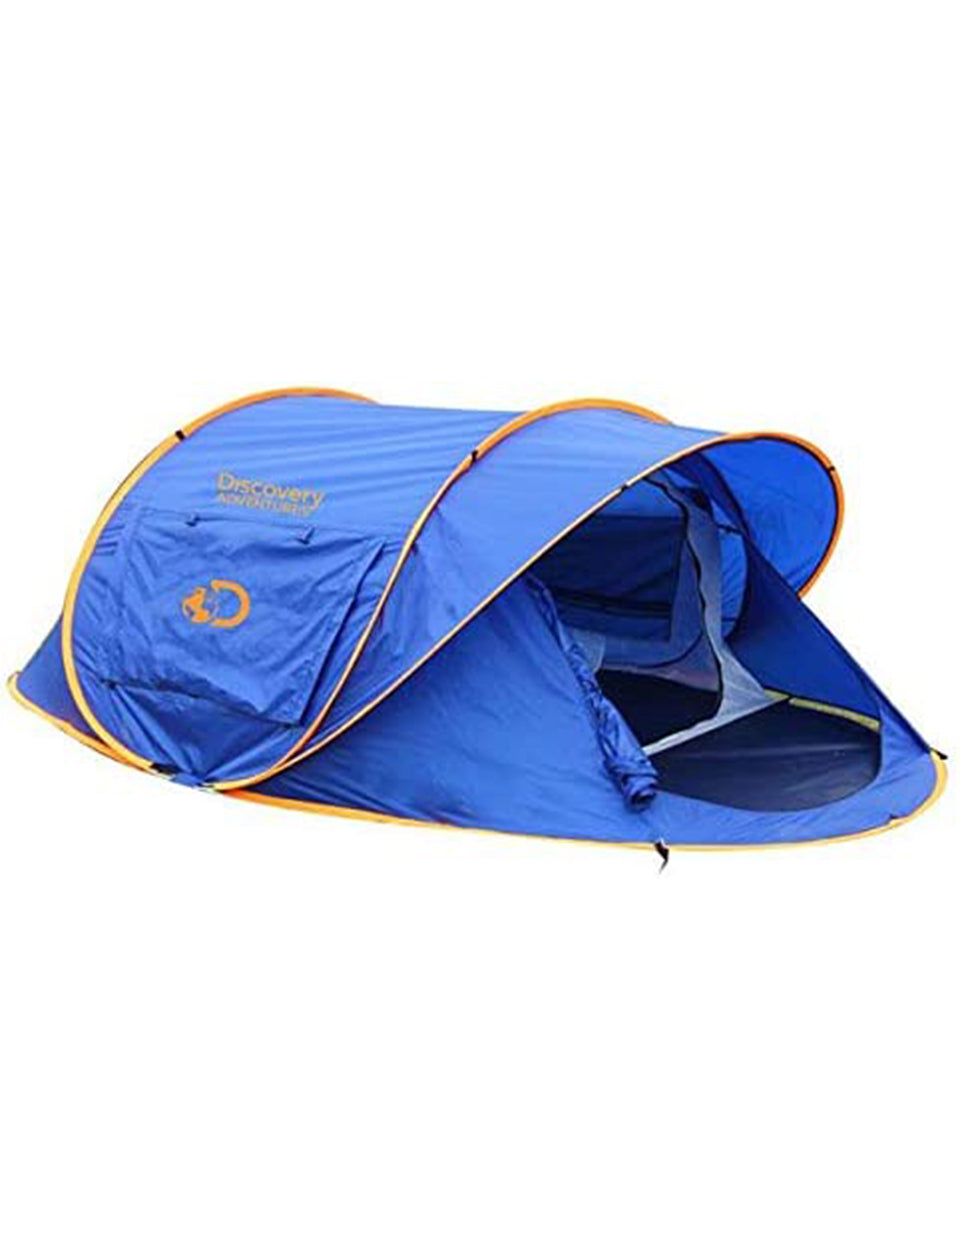 Discovery Adventure 2-3 Person Automatic Camping Tent(Uv50+) Blue DFA66205